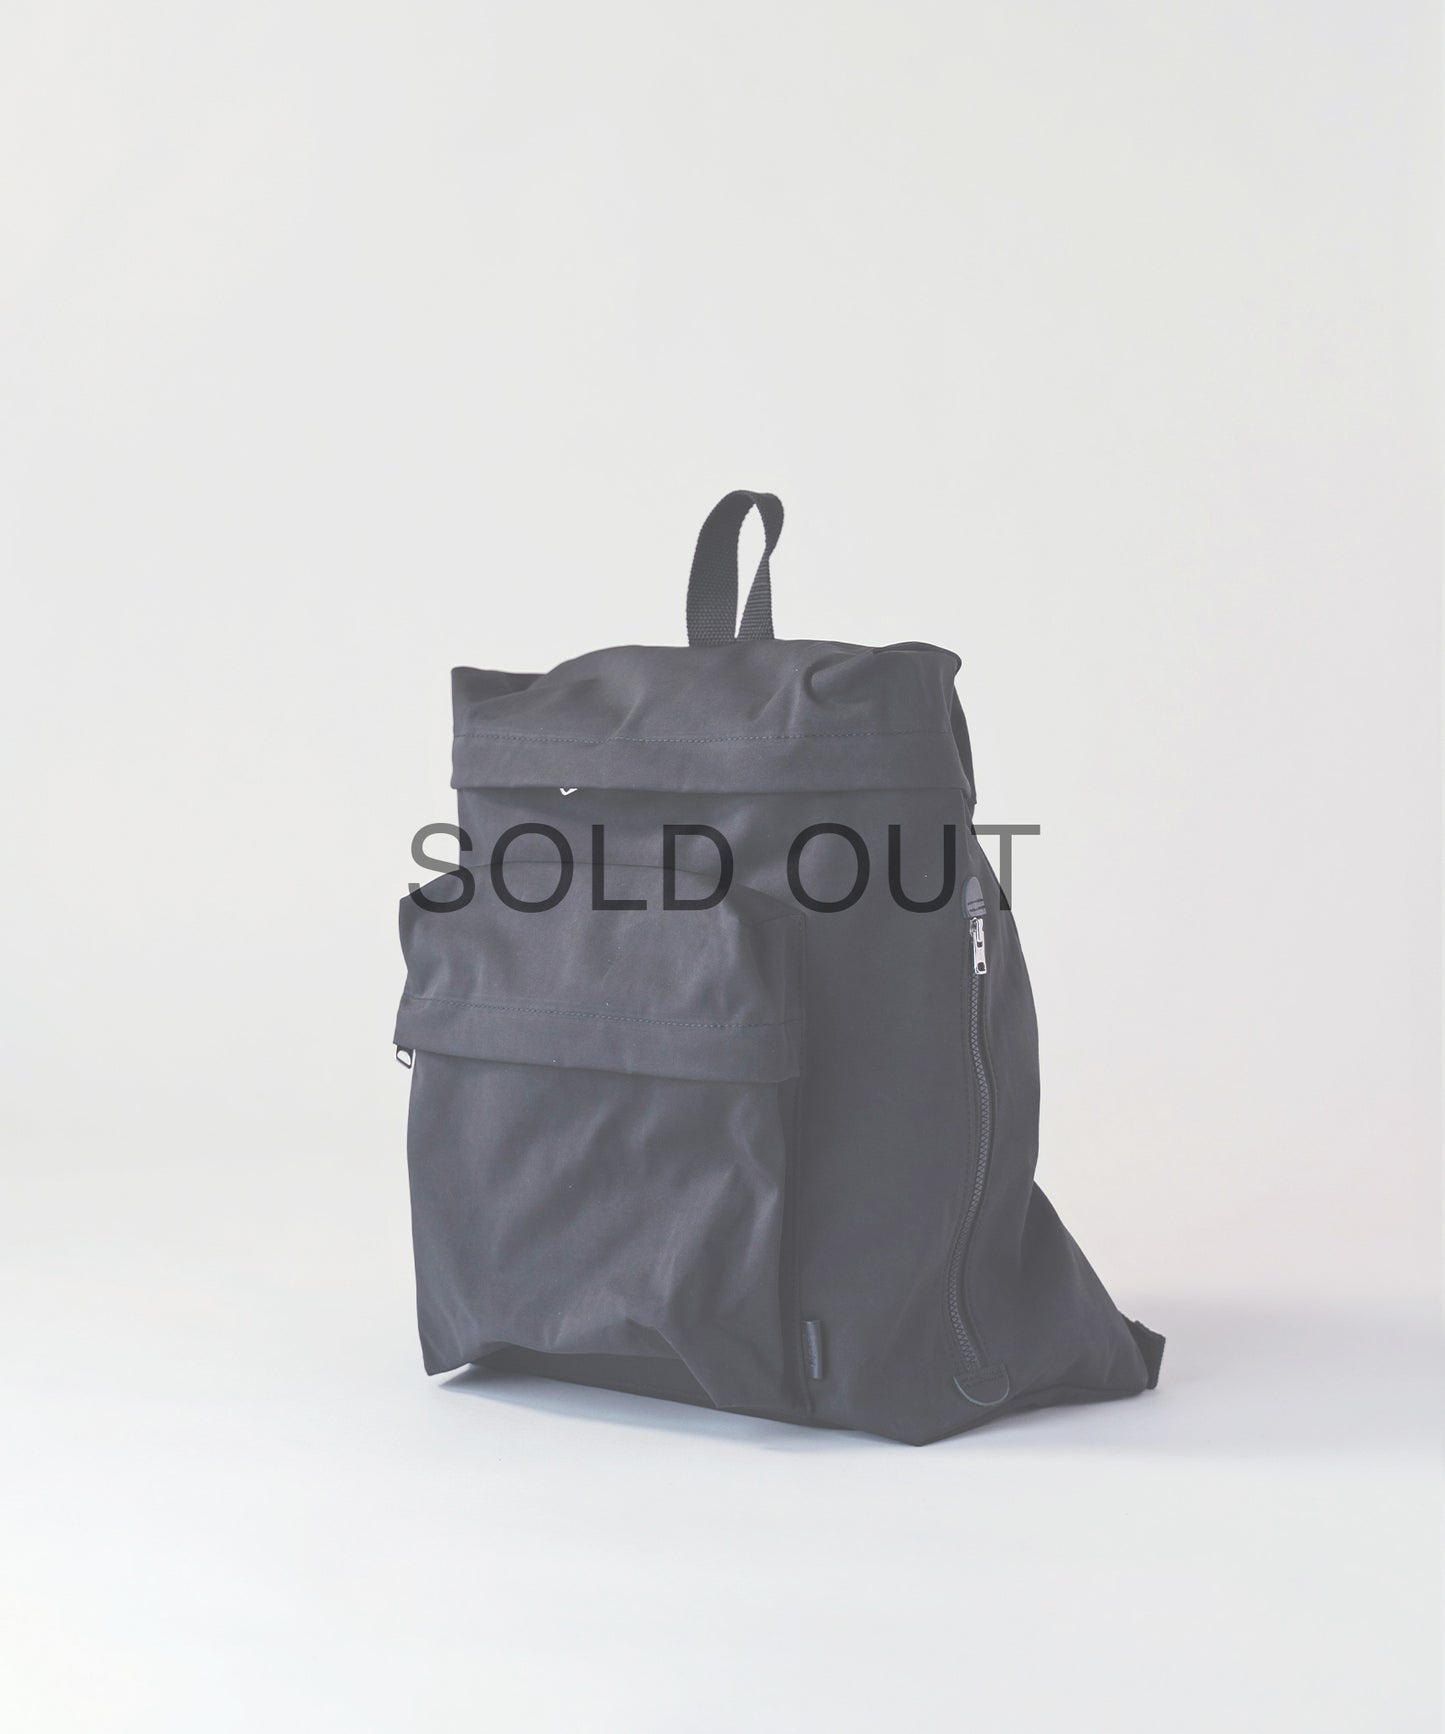 #89/ sold out《SALE 20%》sold out / 80's リュック（black）/ MILspecsNYLON